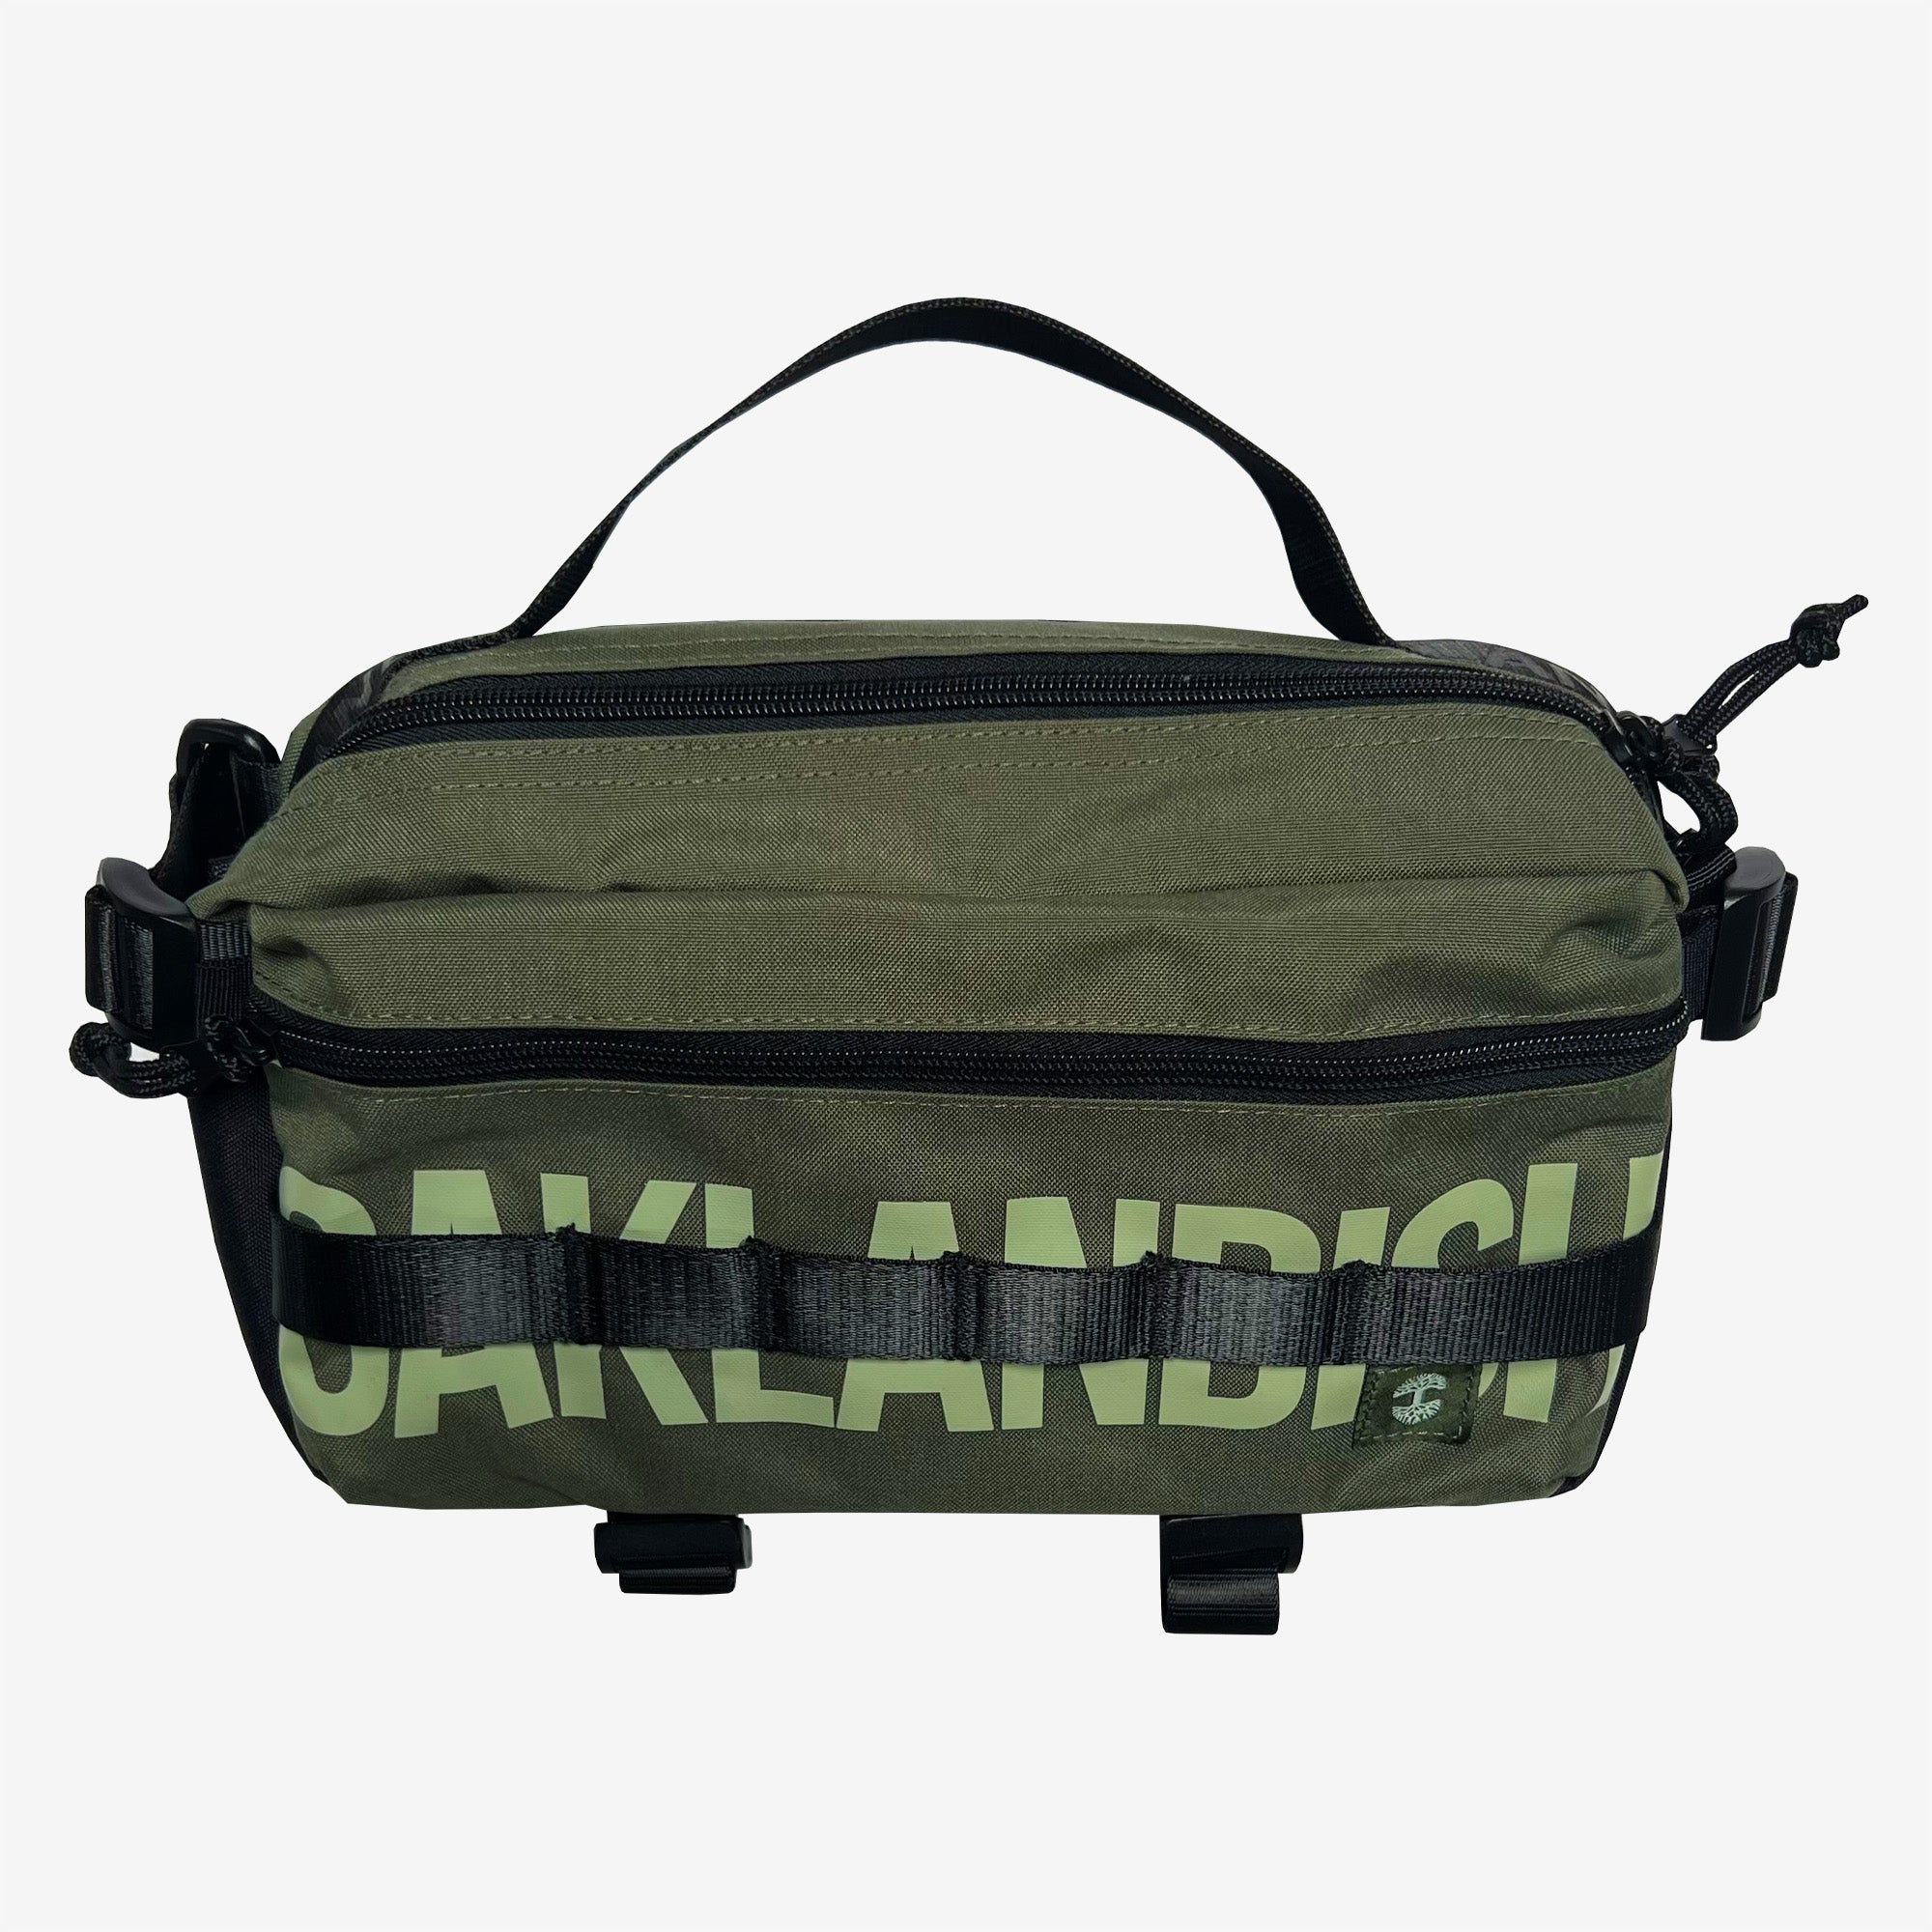 An olive nylon hip bag with a green Oaklandish wordmark, front & top zippers, top handle & small green Oaklandish tree logo.